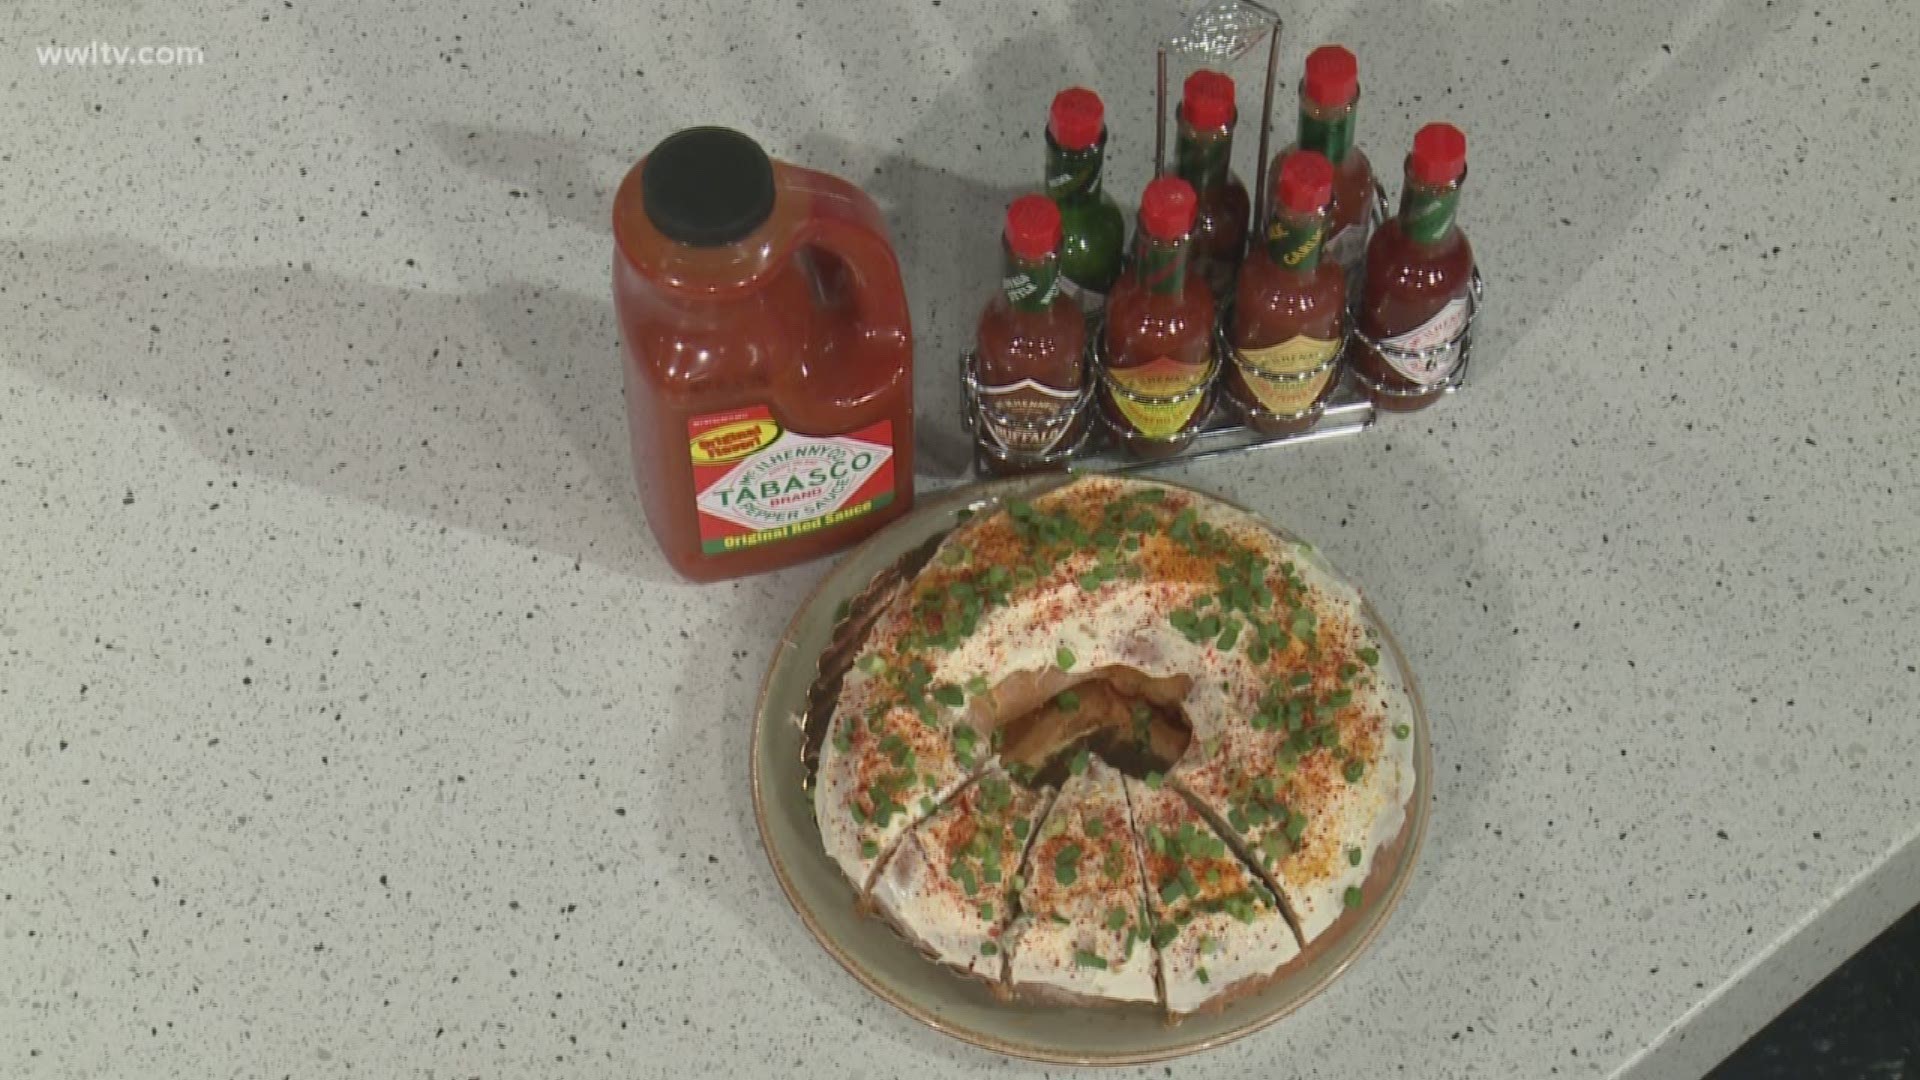 Chef Nathan Richard of Cavan and Sheba are in the kitchen celebrating the Louisiana-made hot sauce "Tabasco."